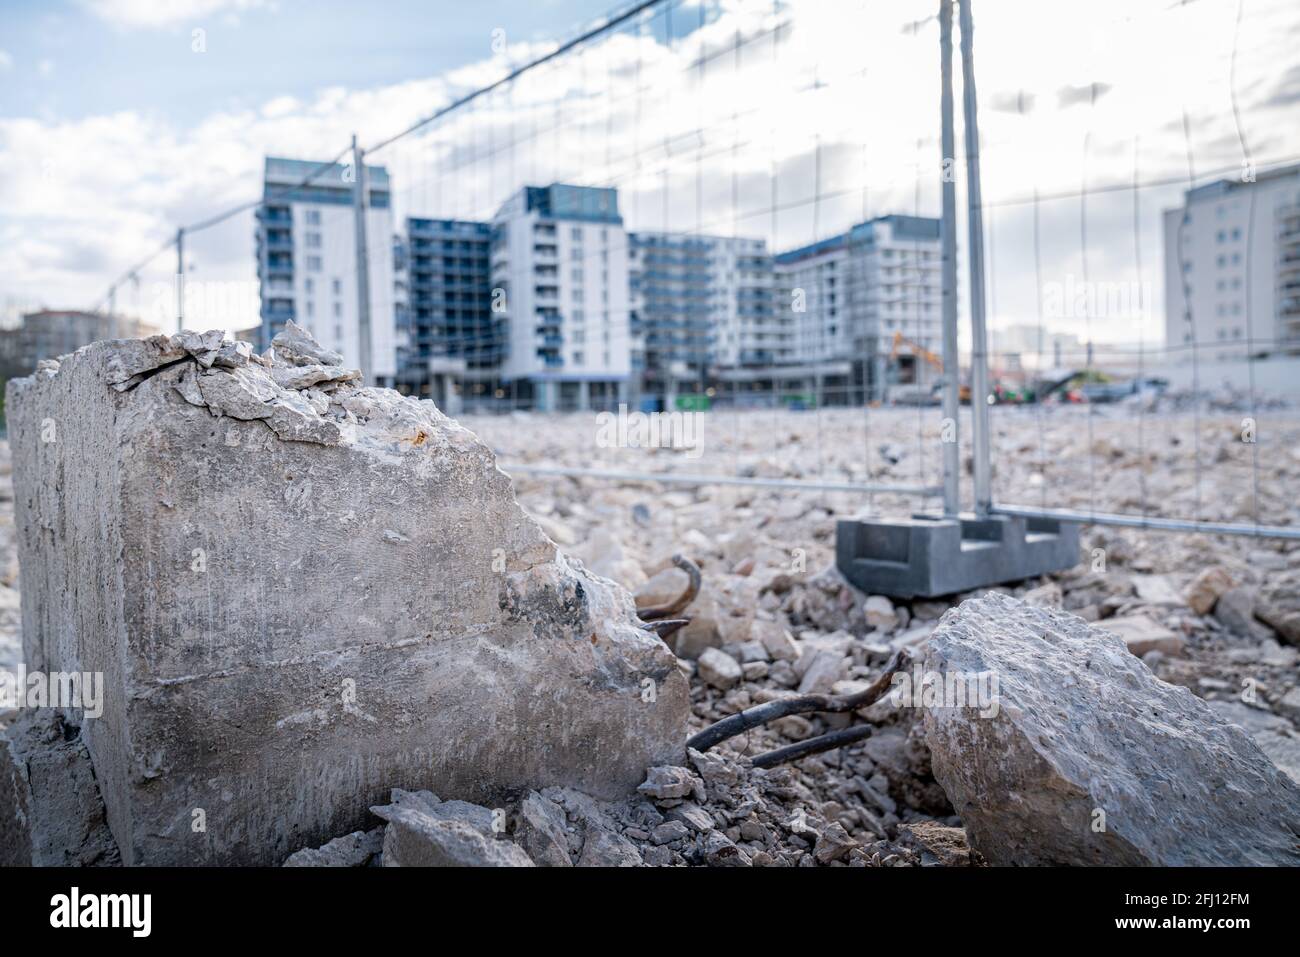 Construction site in the city - Real Estate project Stock Photo